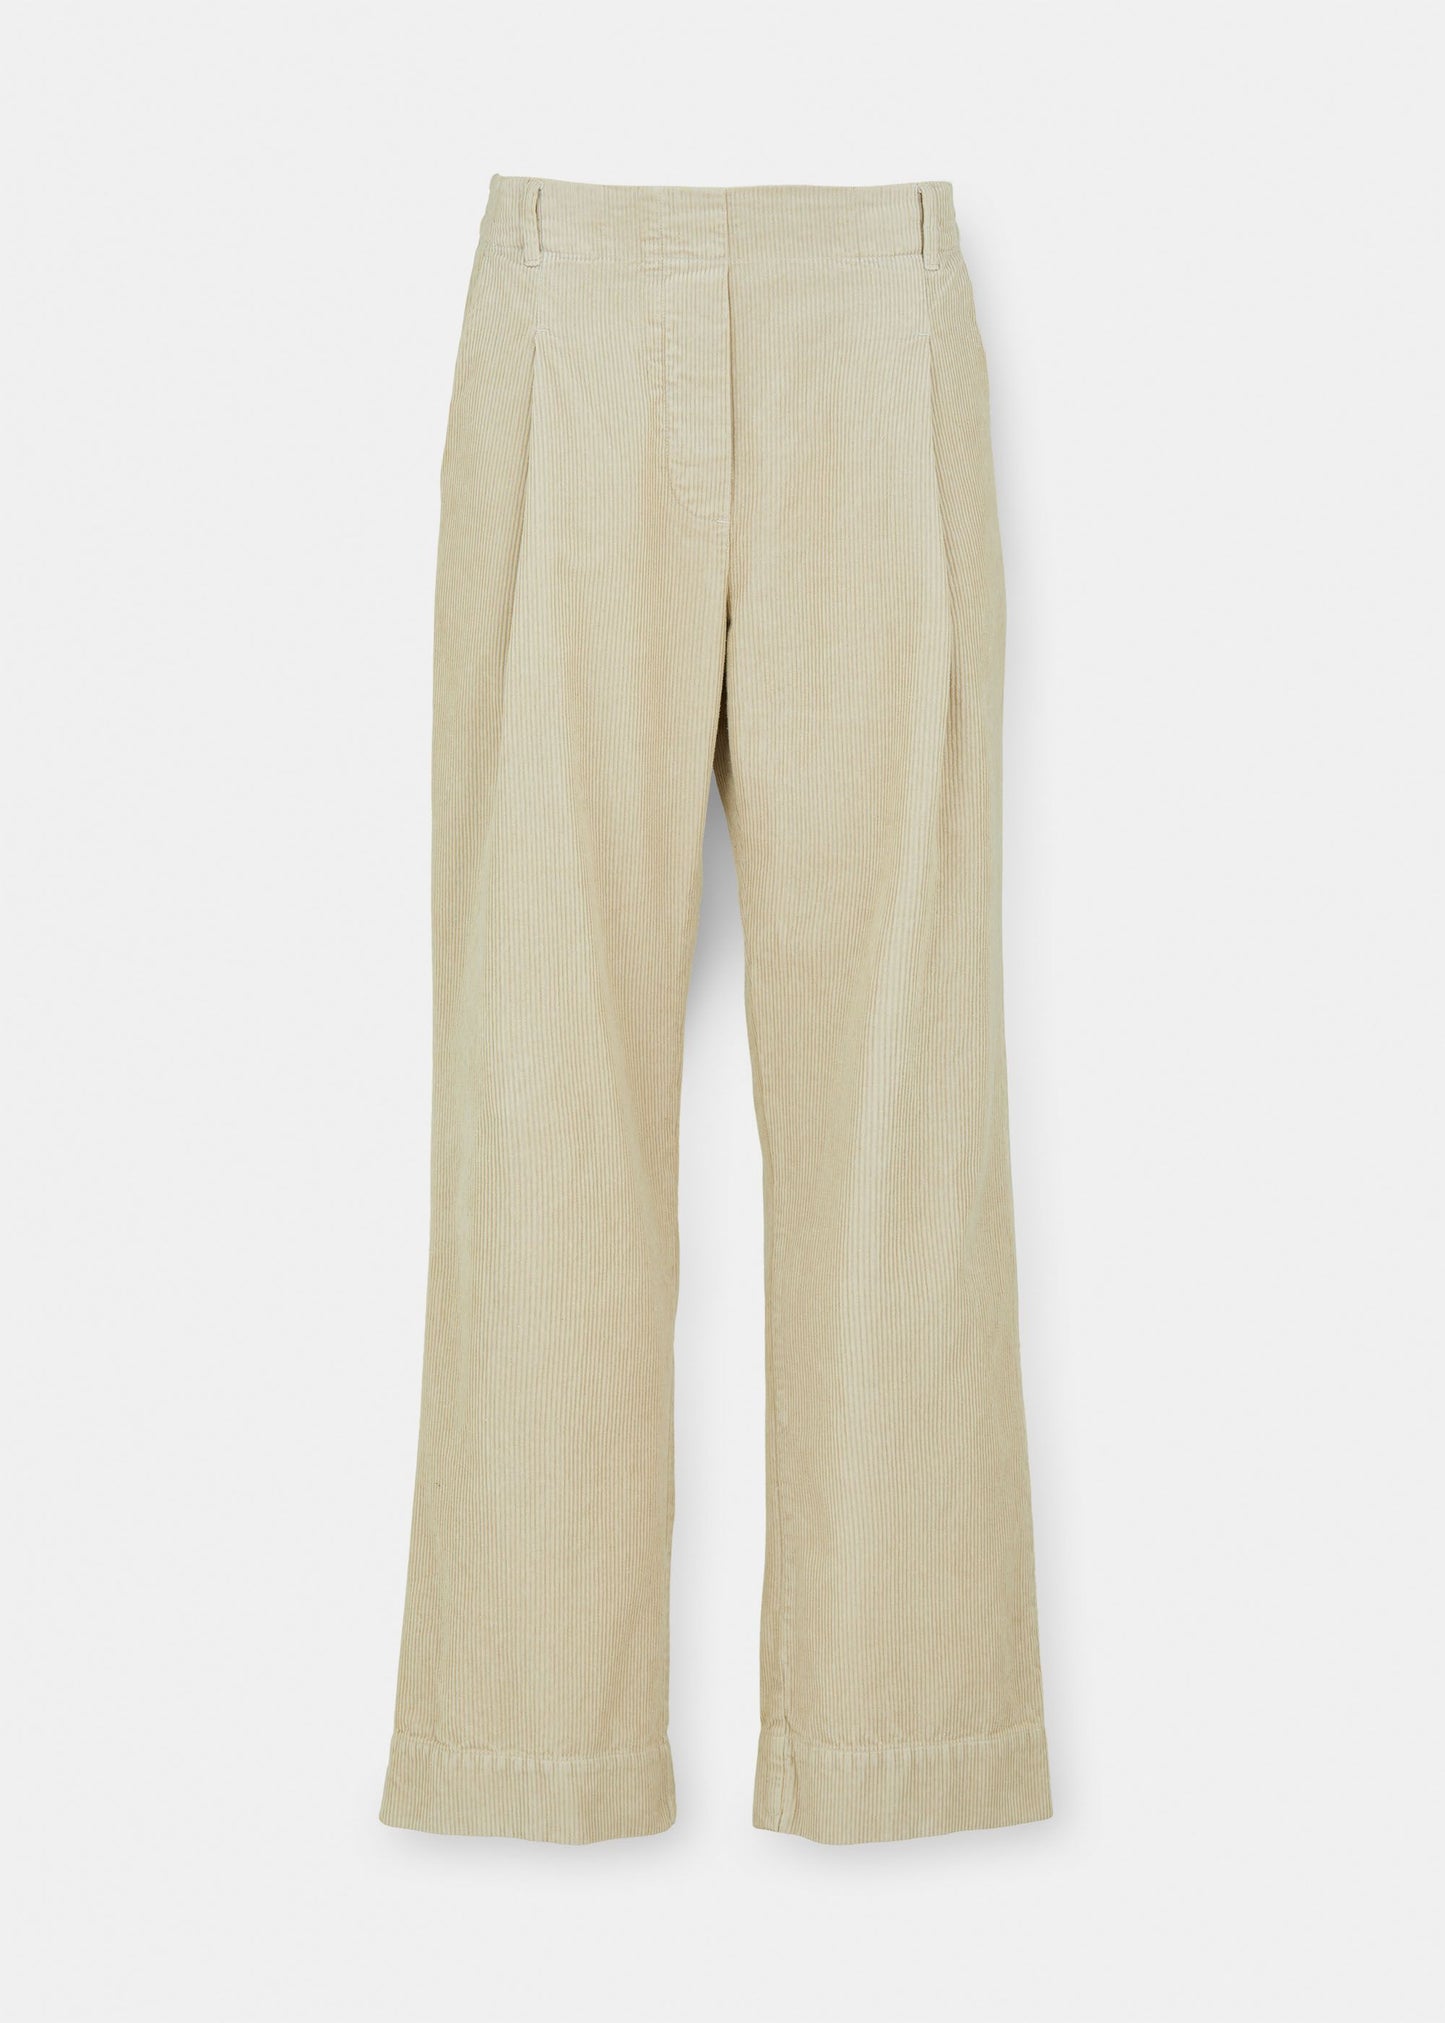 Aiayu "Billy Pant Corduroy" Fossil